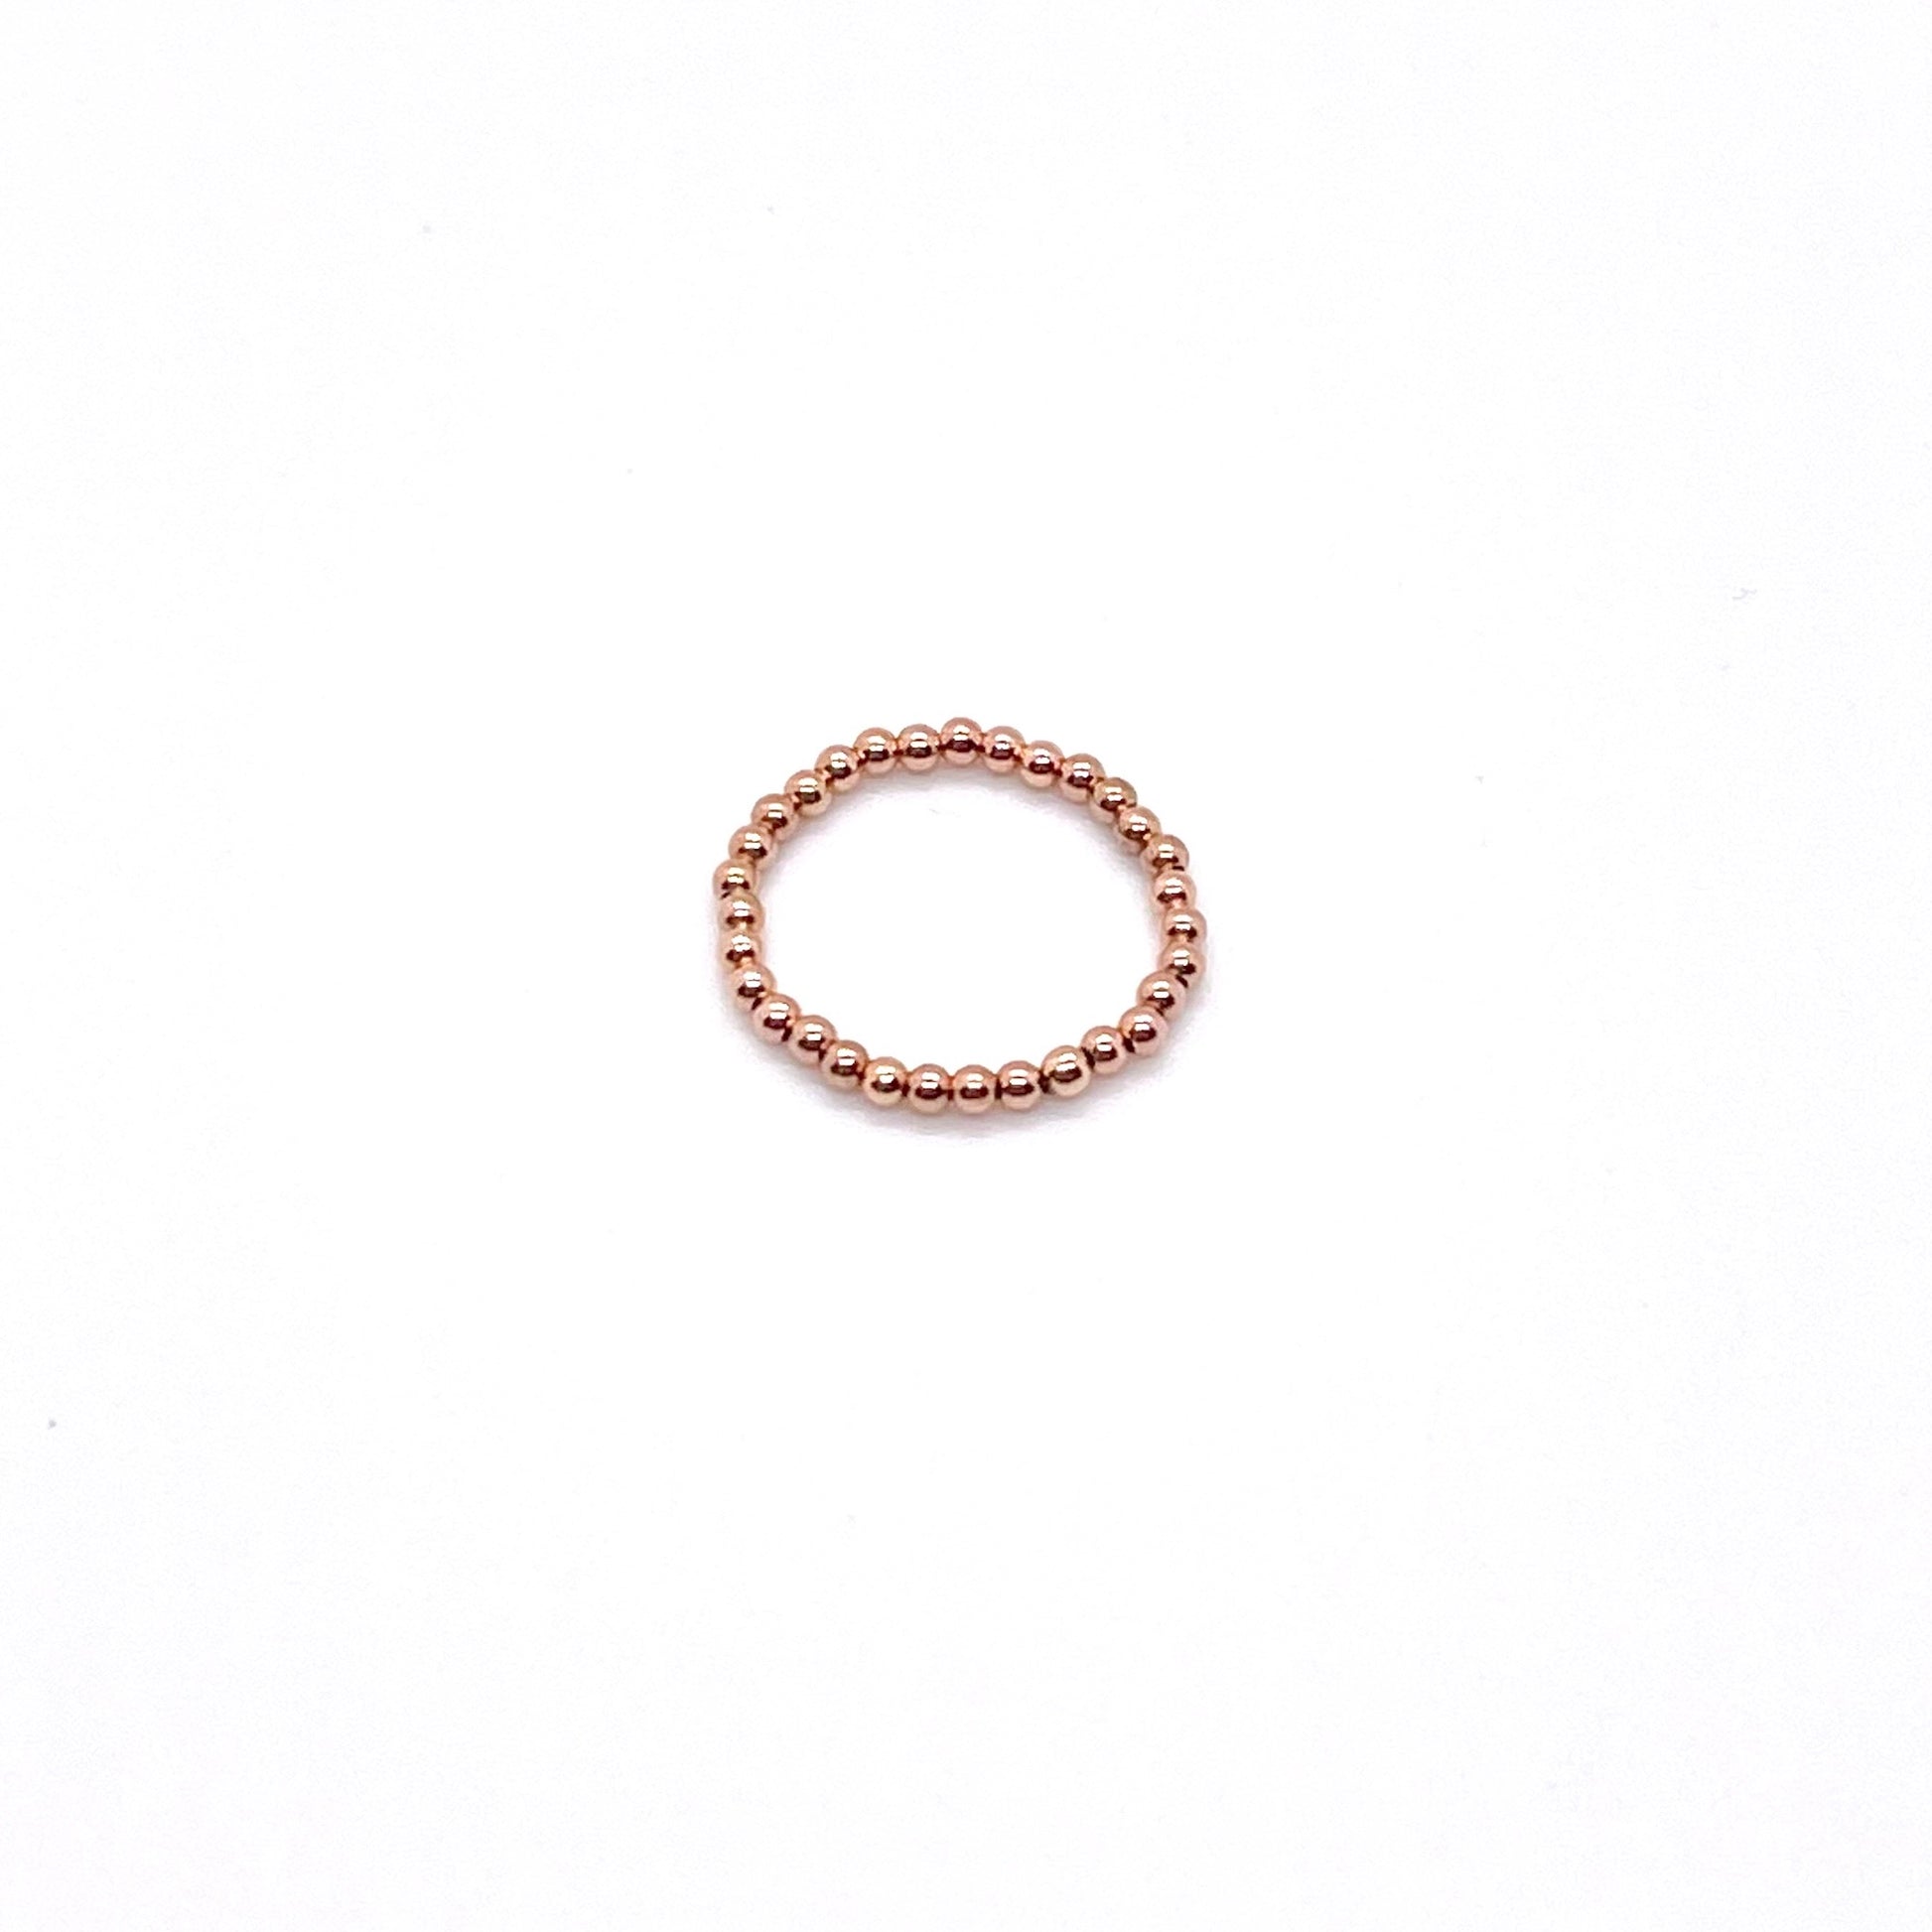 Rose gold bead ring with 2mm 14K gold filled waterproof beads on elastic stretch cord.